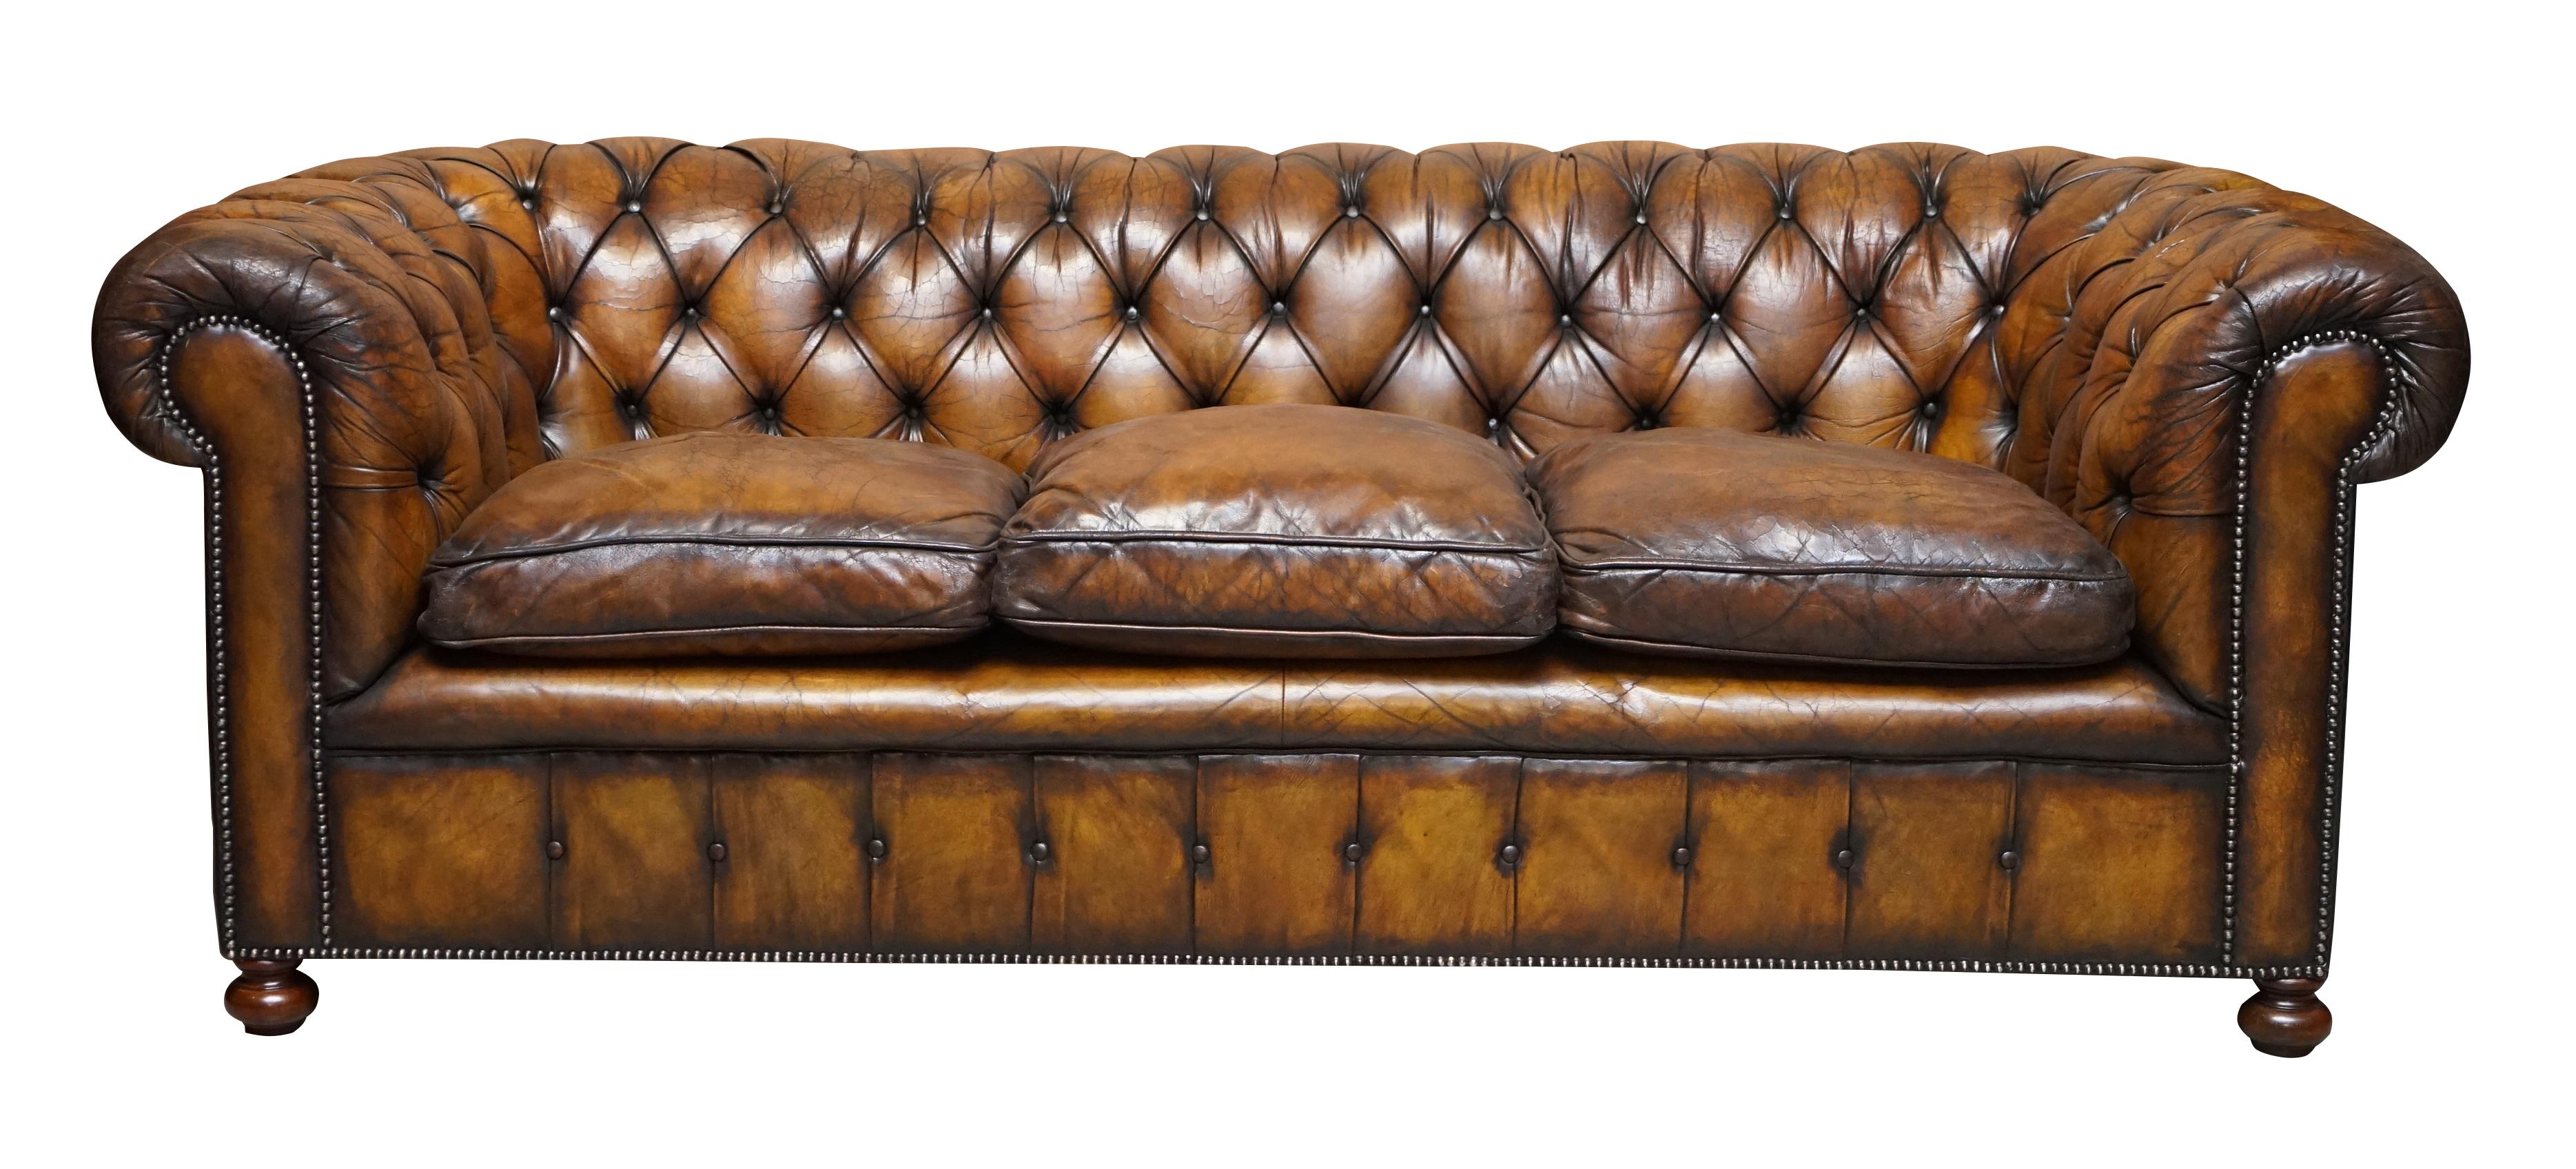 We are delighted to offer for sale this exceptionally rare original 1950s cigar brown leather chesterfield club sofa in restored condition with feather filled cushions 

This is a very rare find, you almost never come across mid 20th century